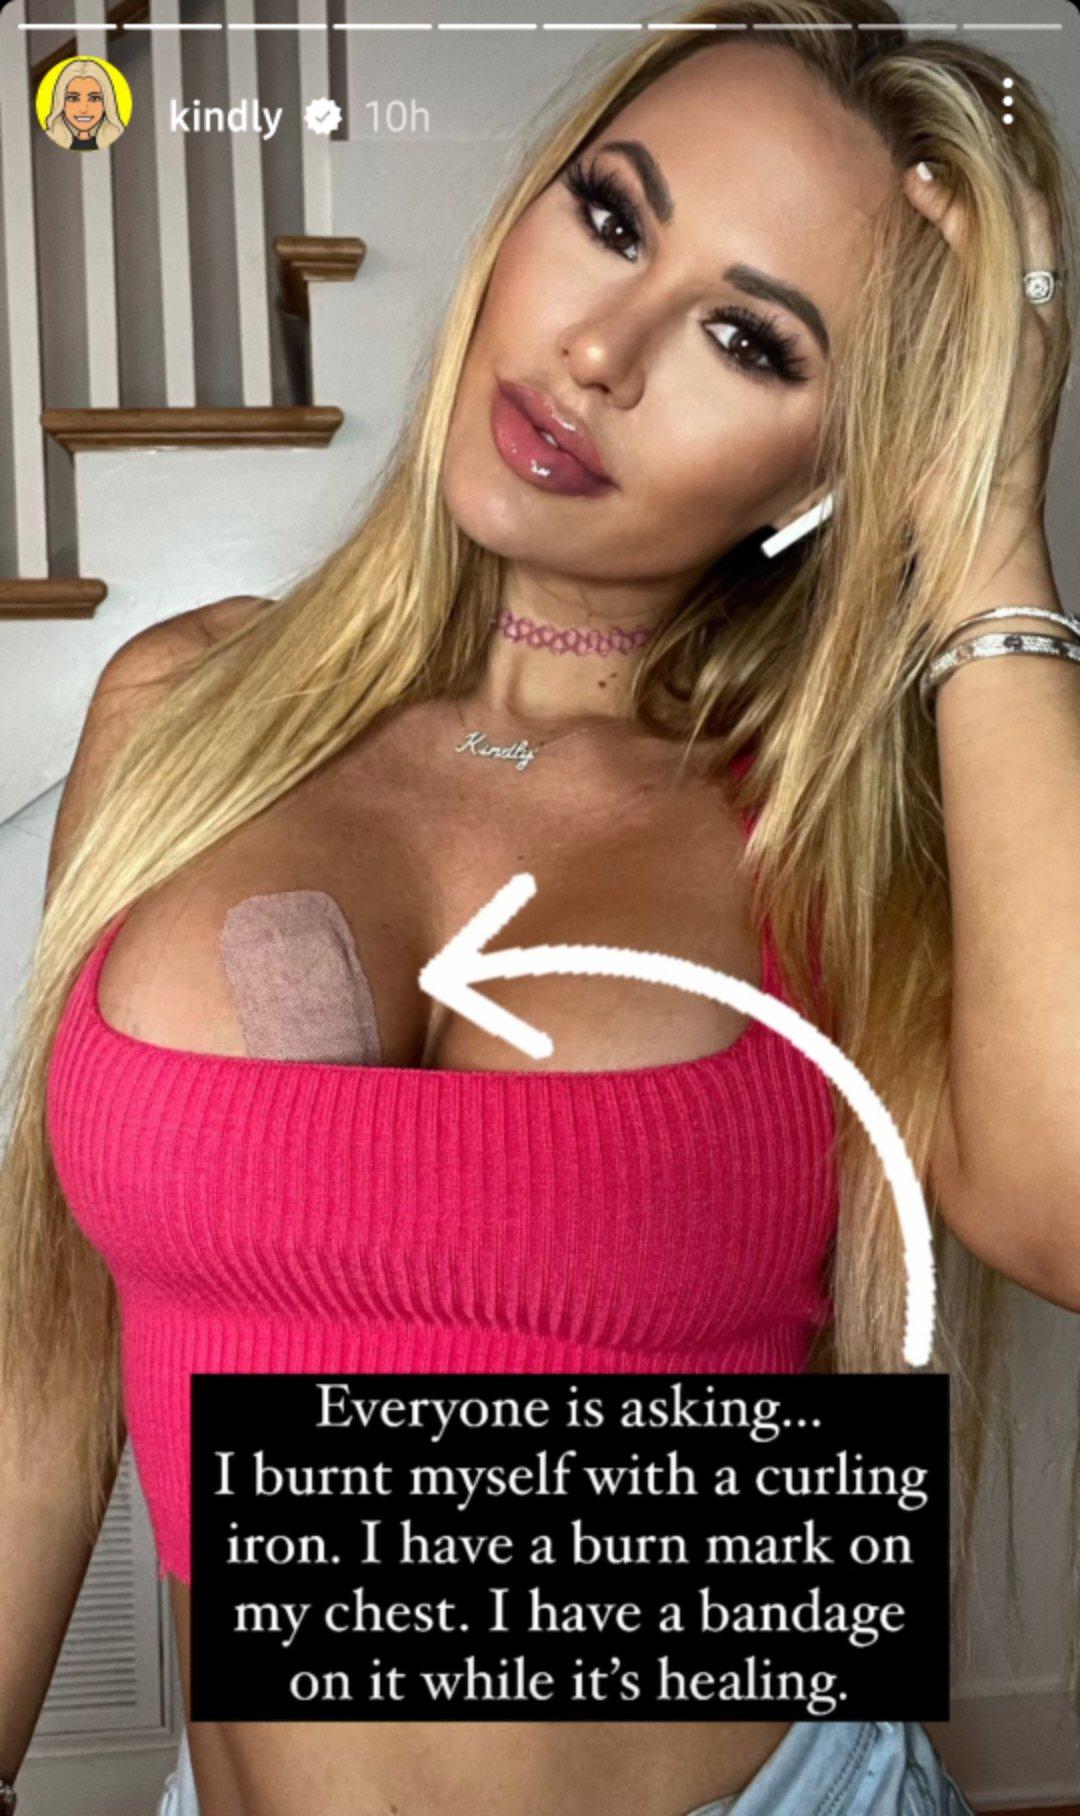 Kindly Myers accidently burns herself